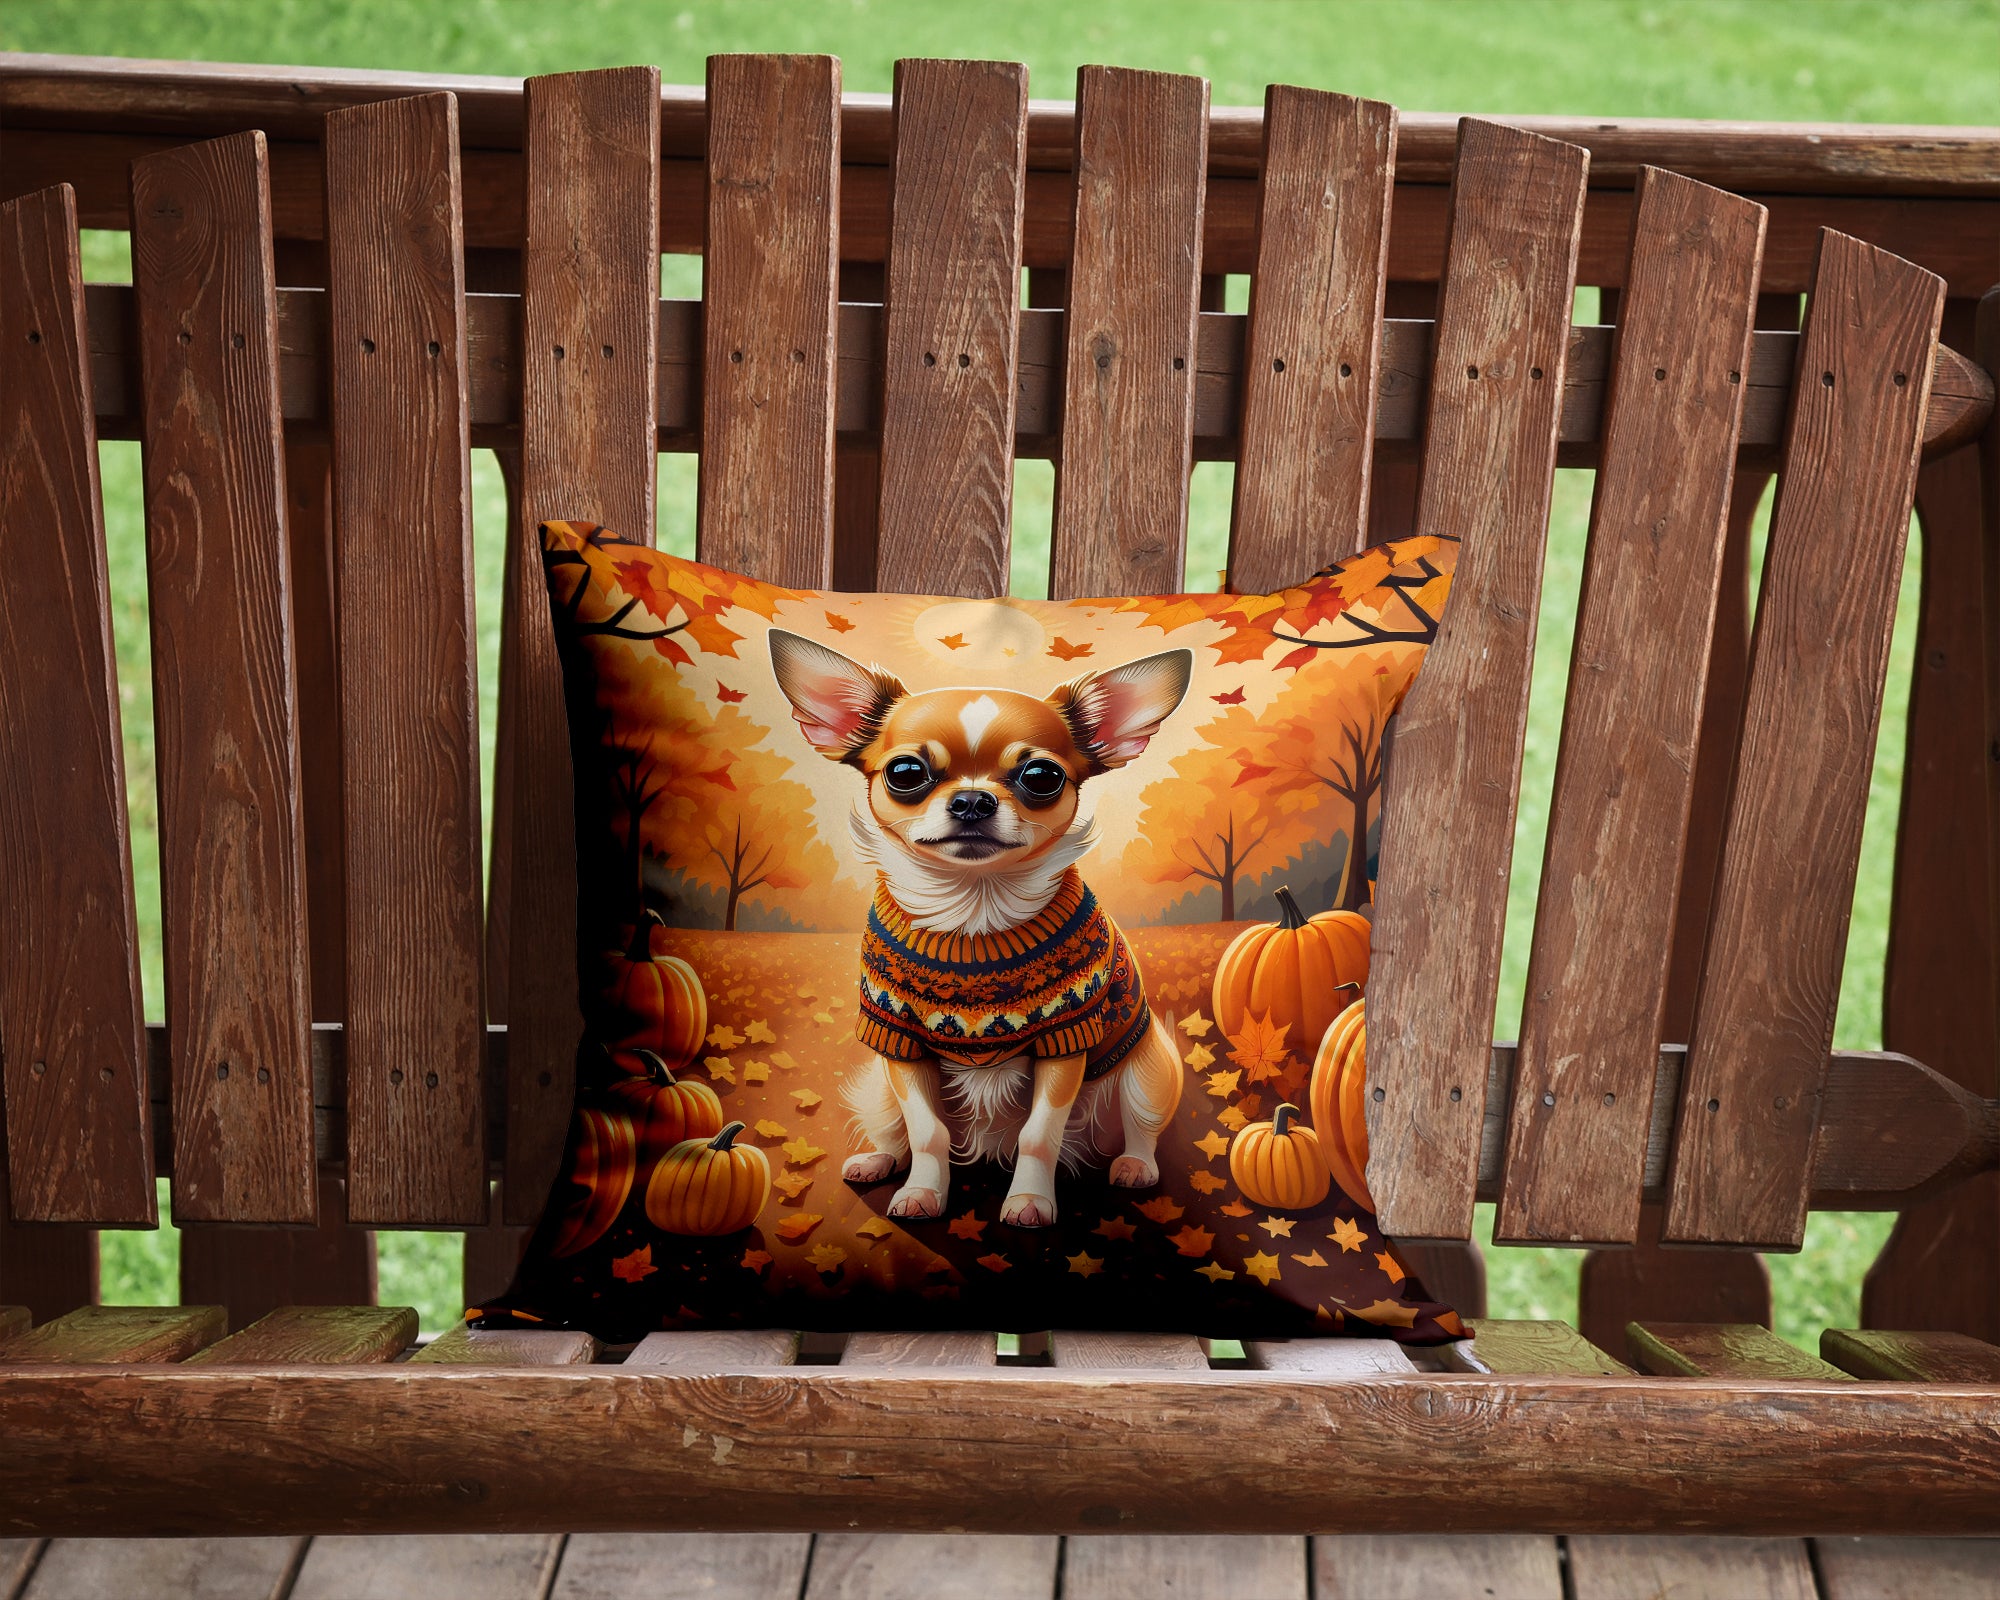 Buy this Chihuahua Fall Fabric Decorative Pillow